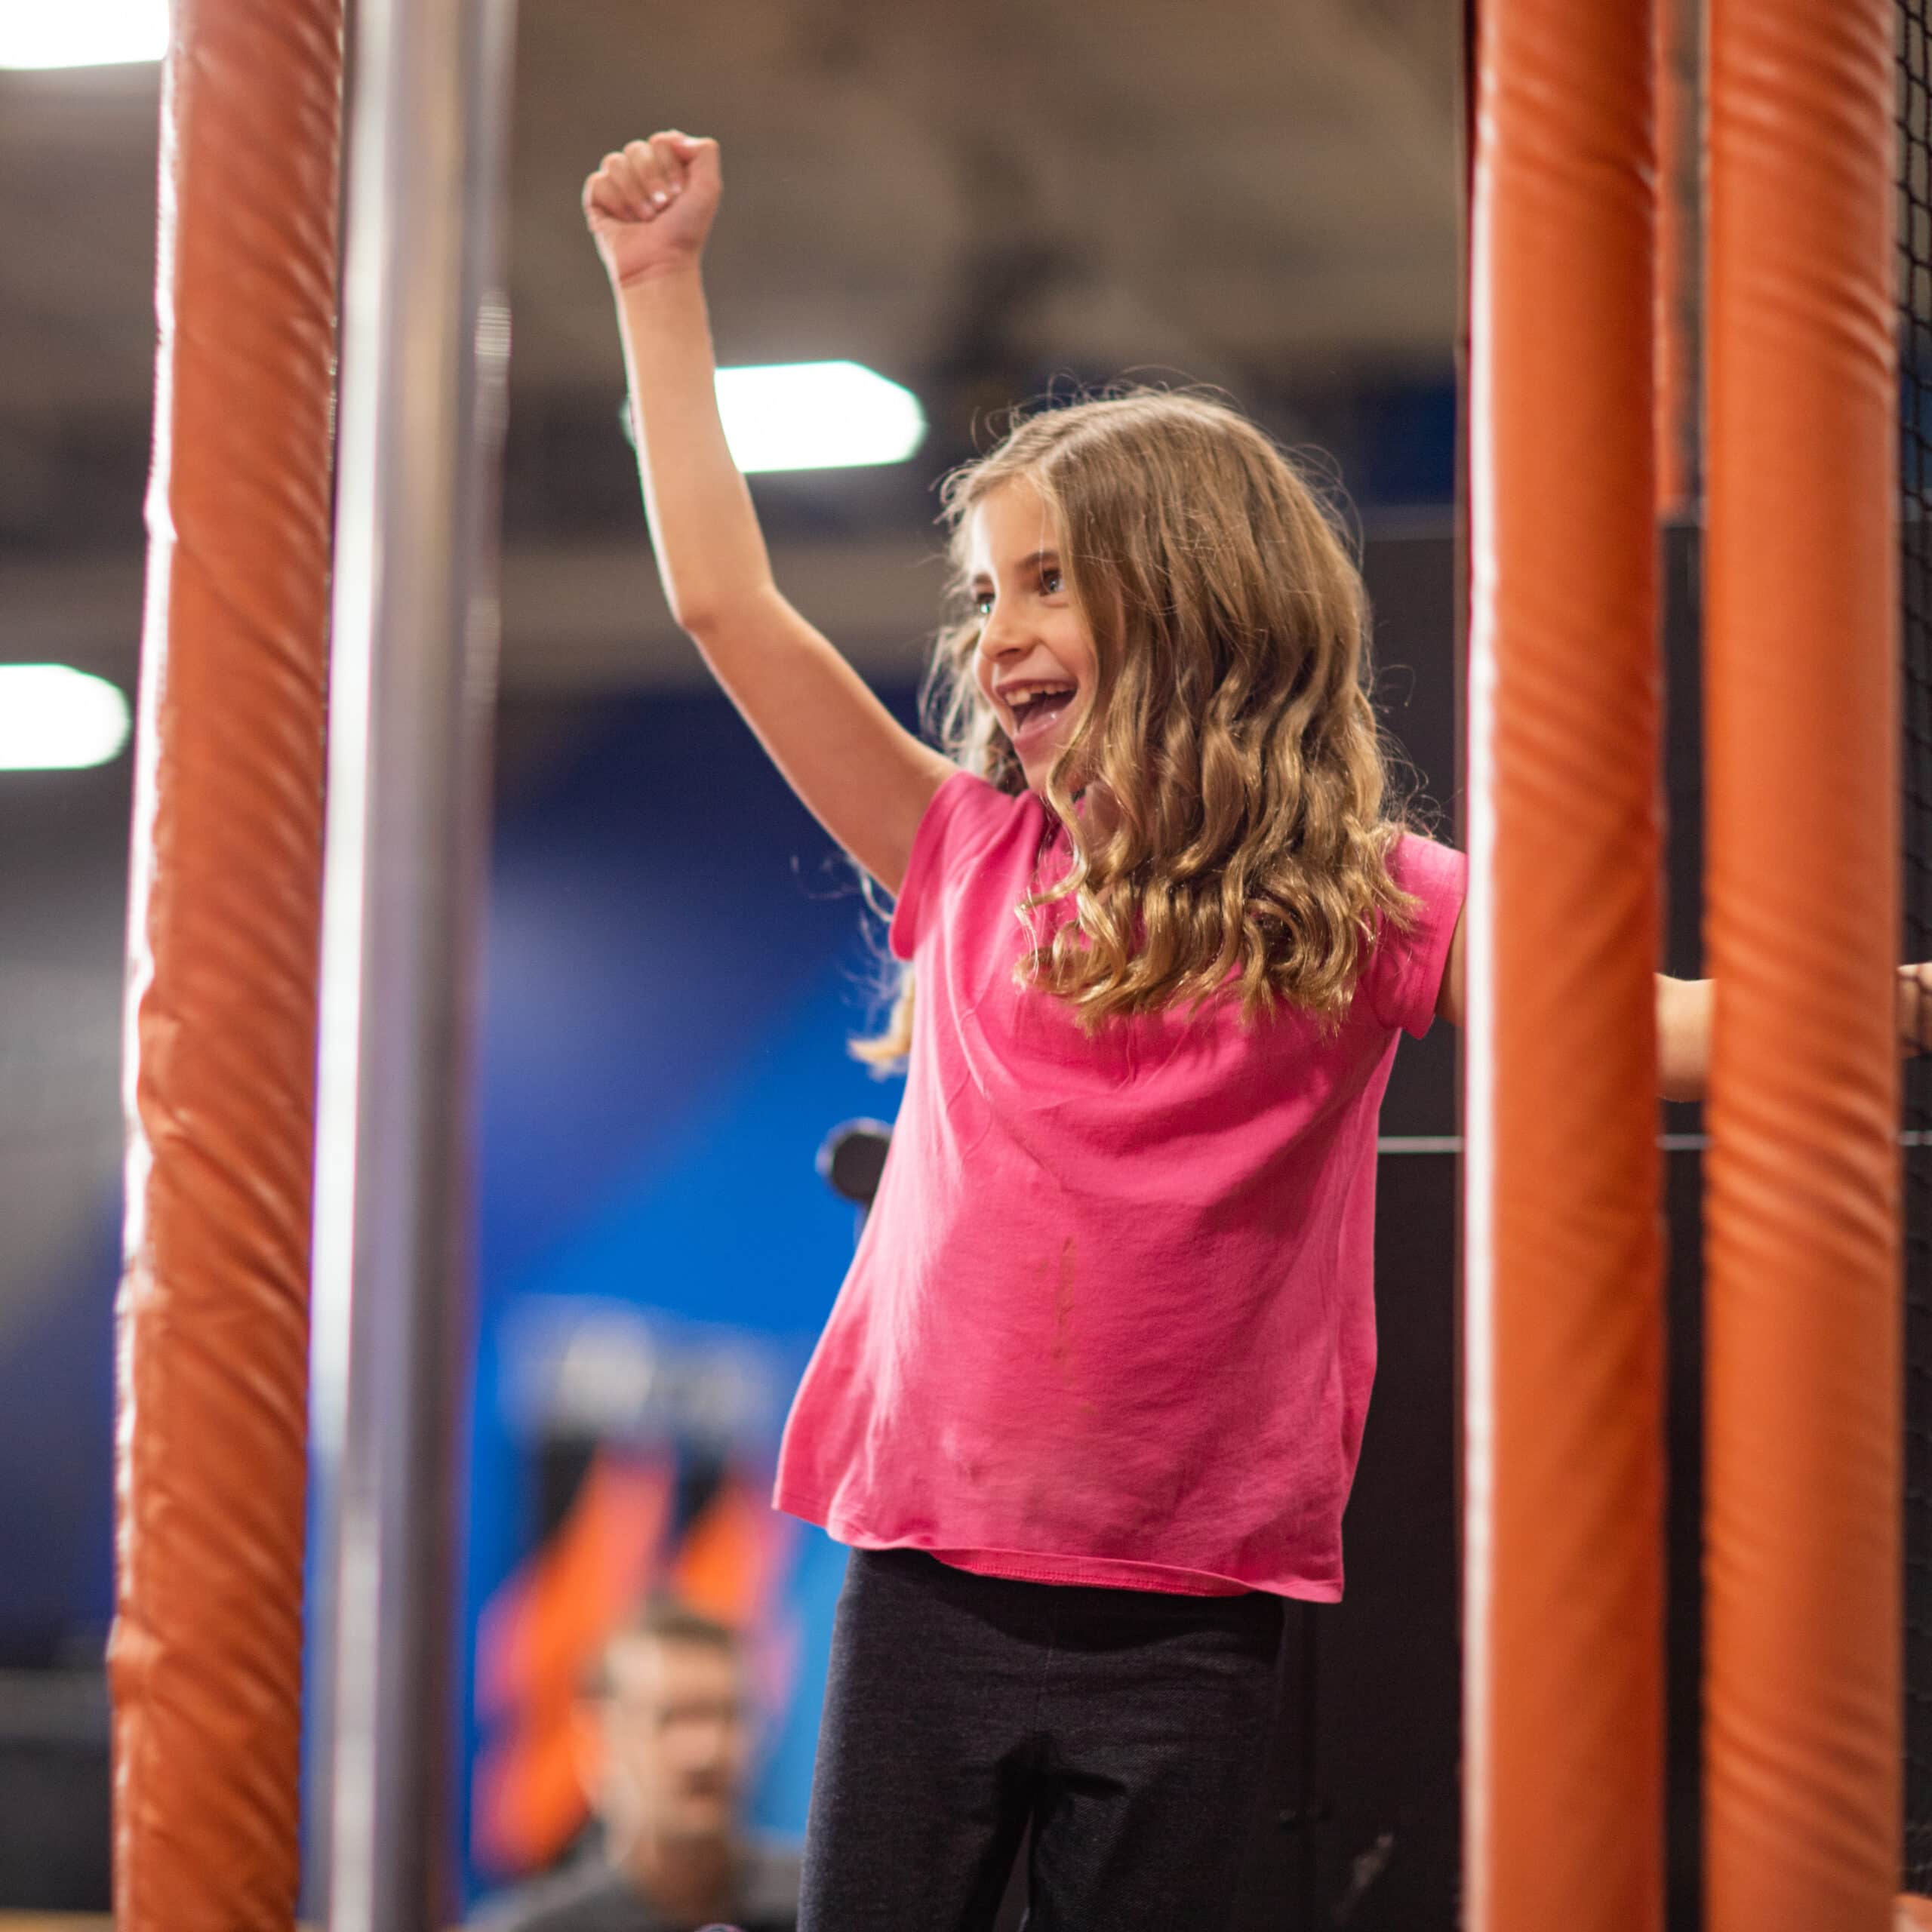 Trampoline Park & Indoor Entertainment with 200 Locations